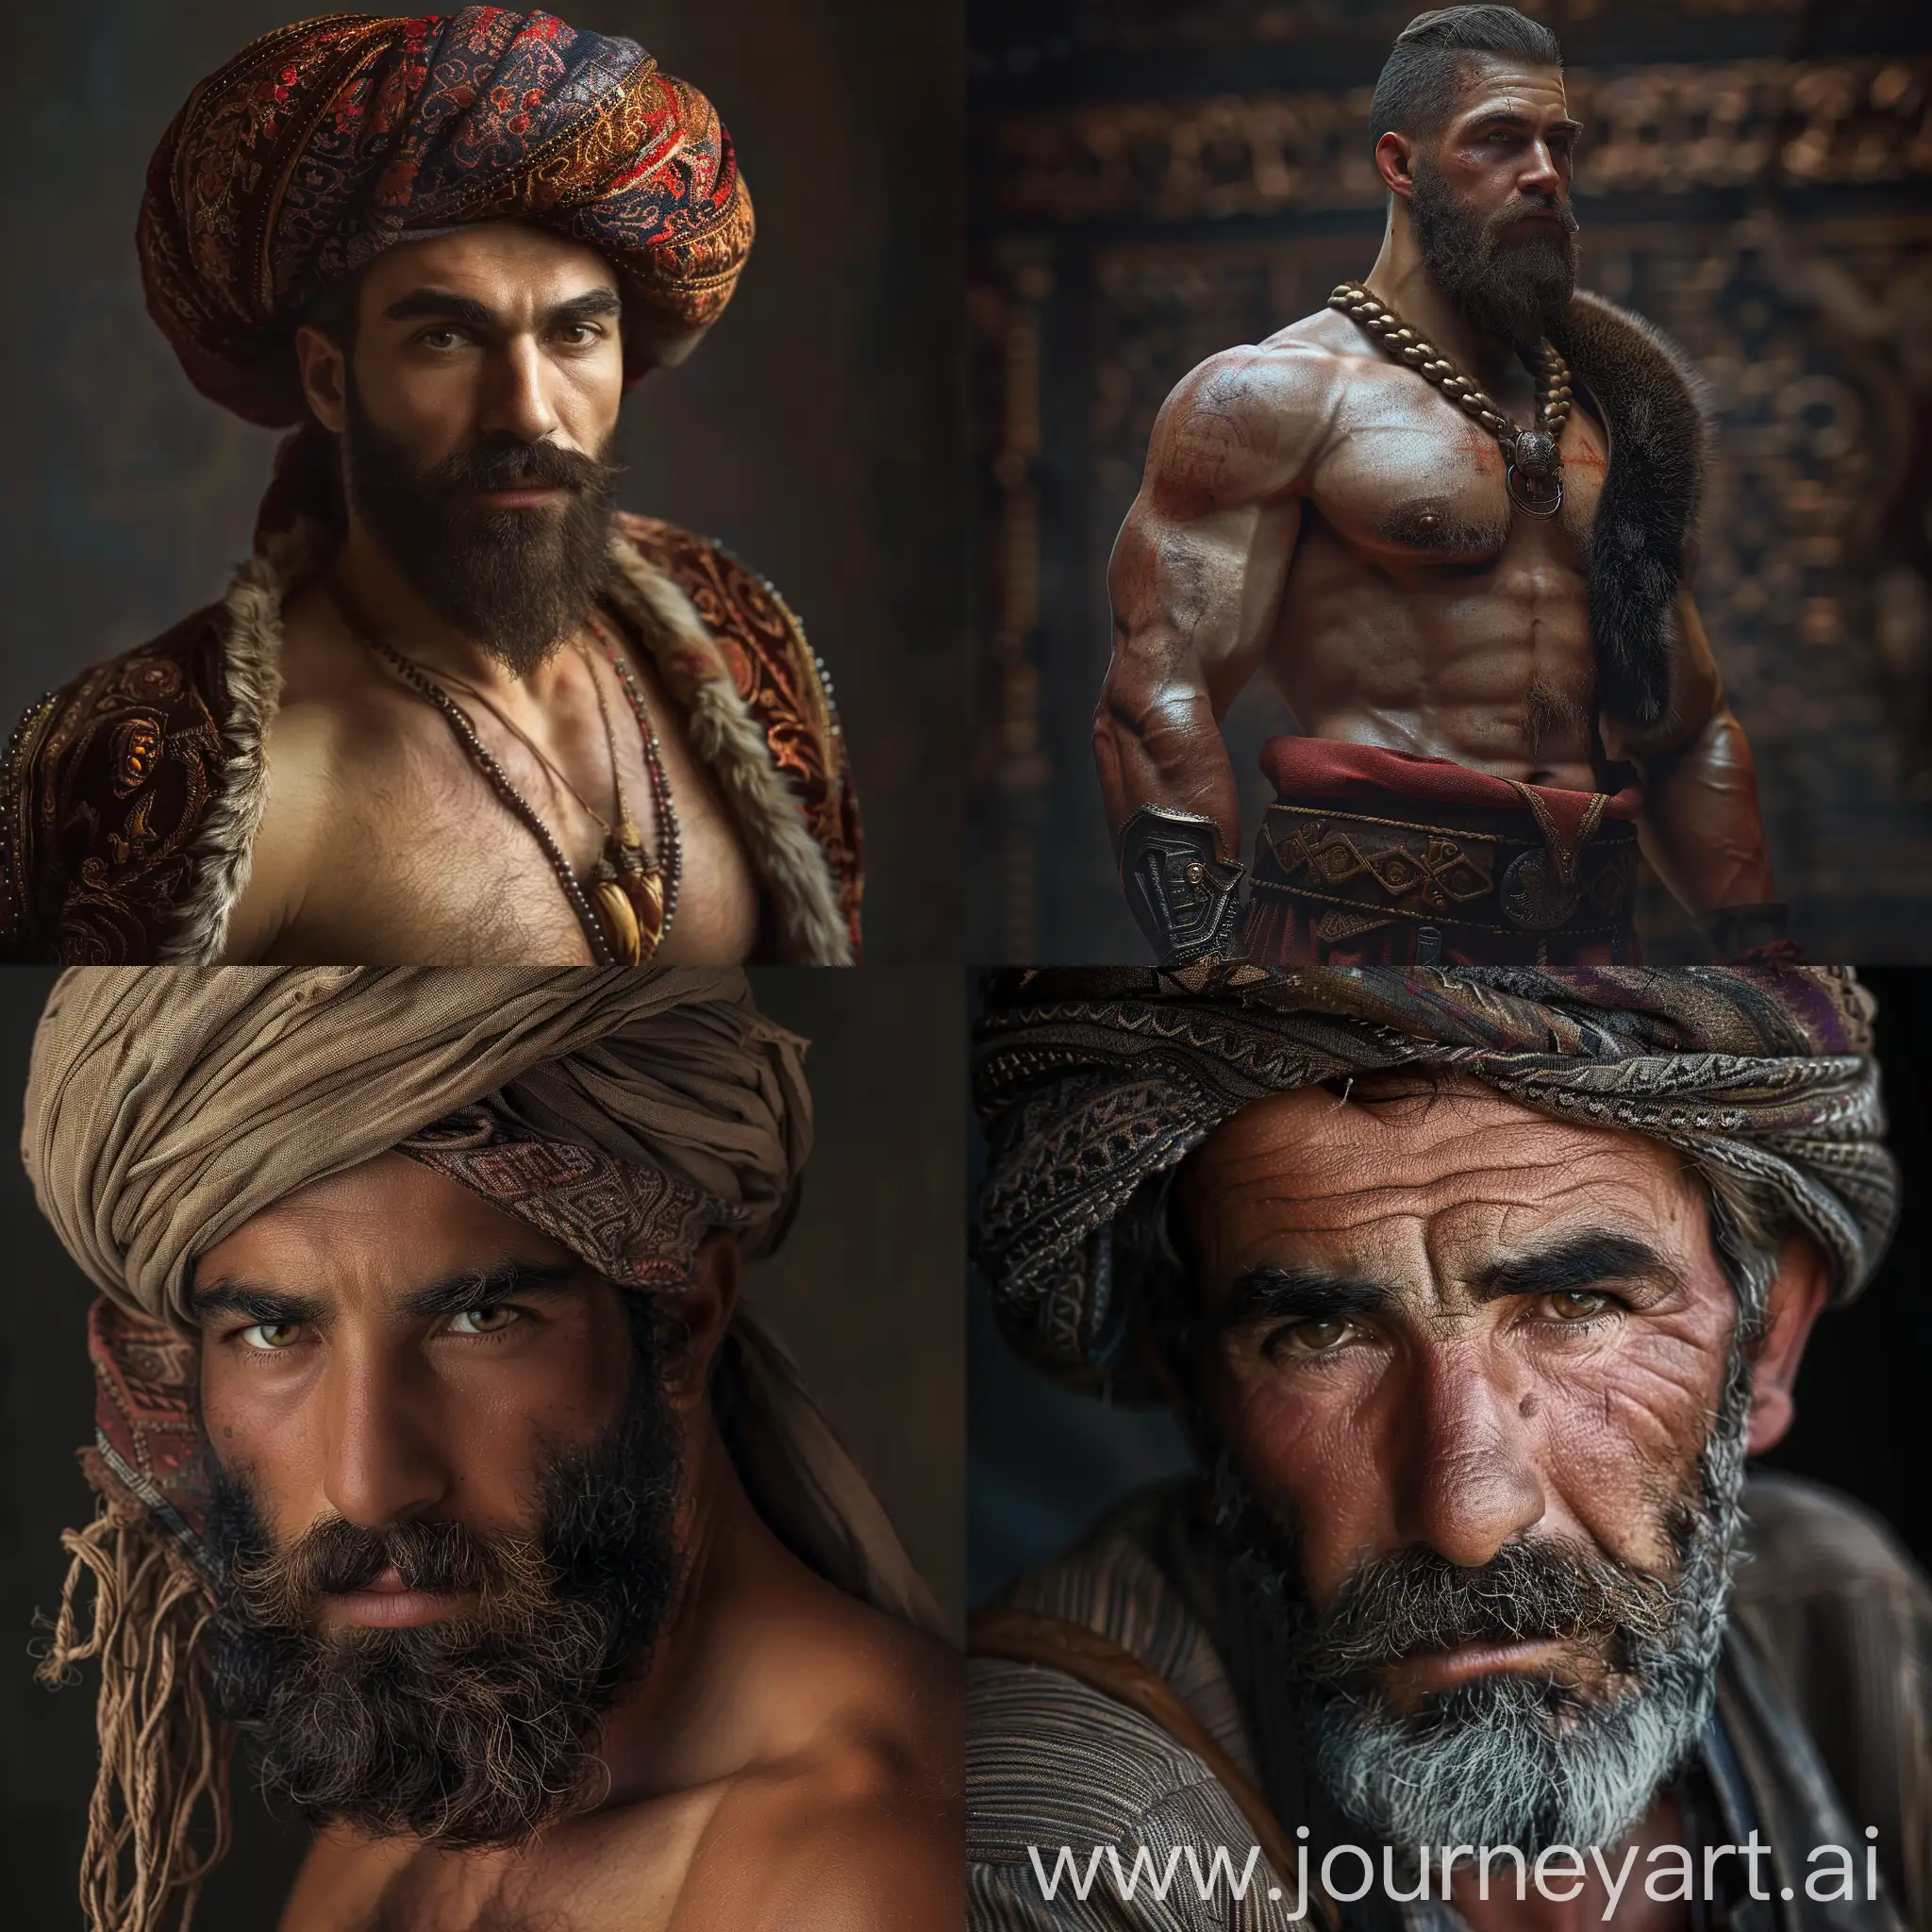 Anatolian-Male-in-4K-Resolution-Captivating-Portrait-with-a-Cultural-Touch